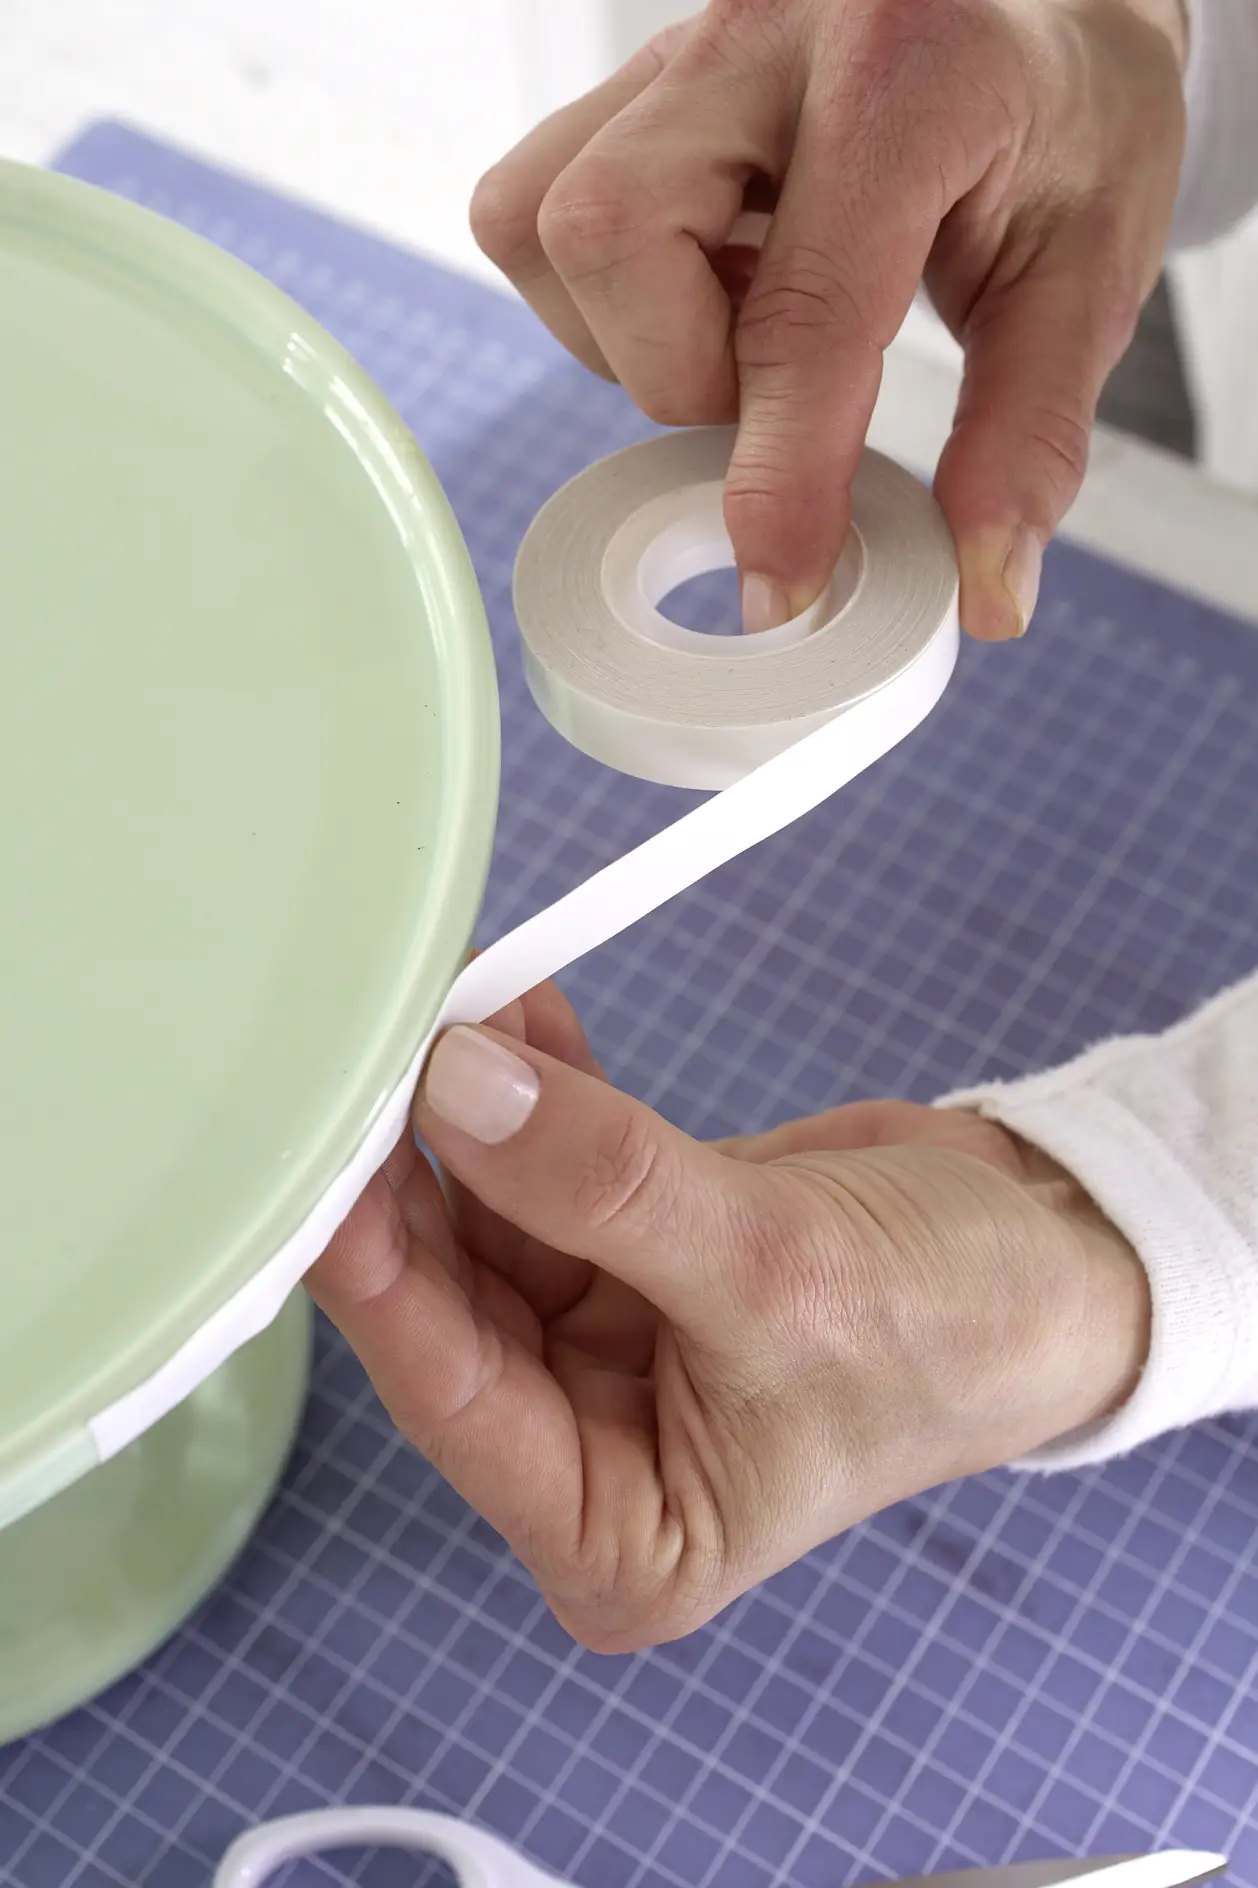 Apply a strip of tesa® double-sided tape on the upper edge of the cake stand and remove the protective film.